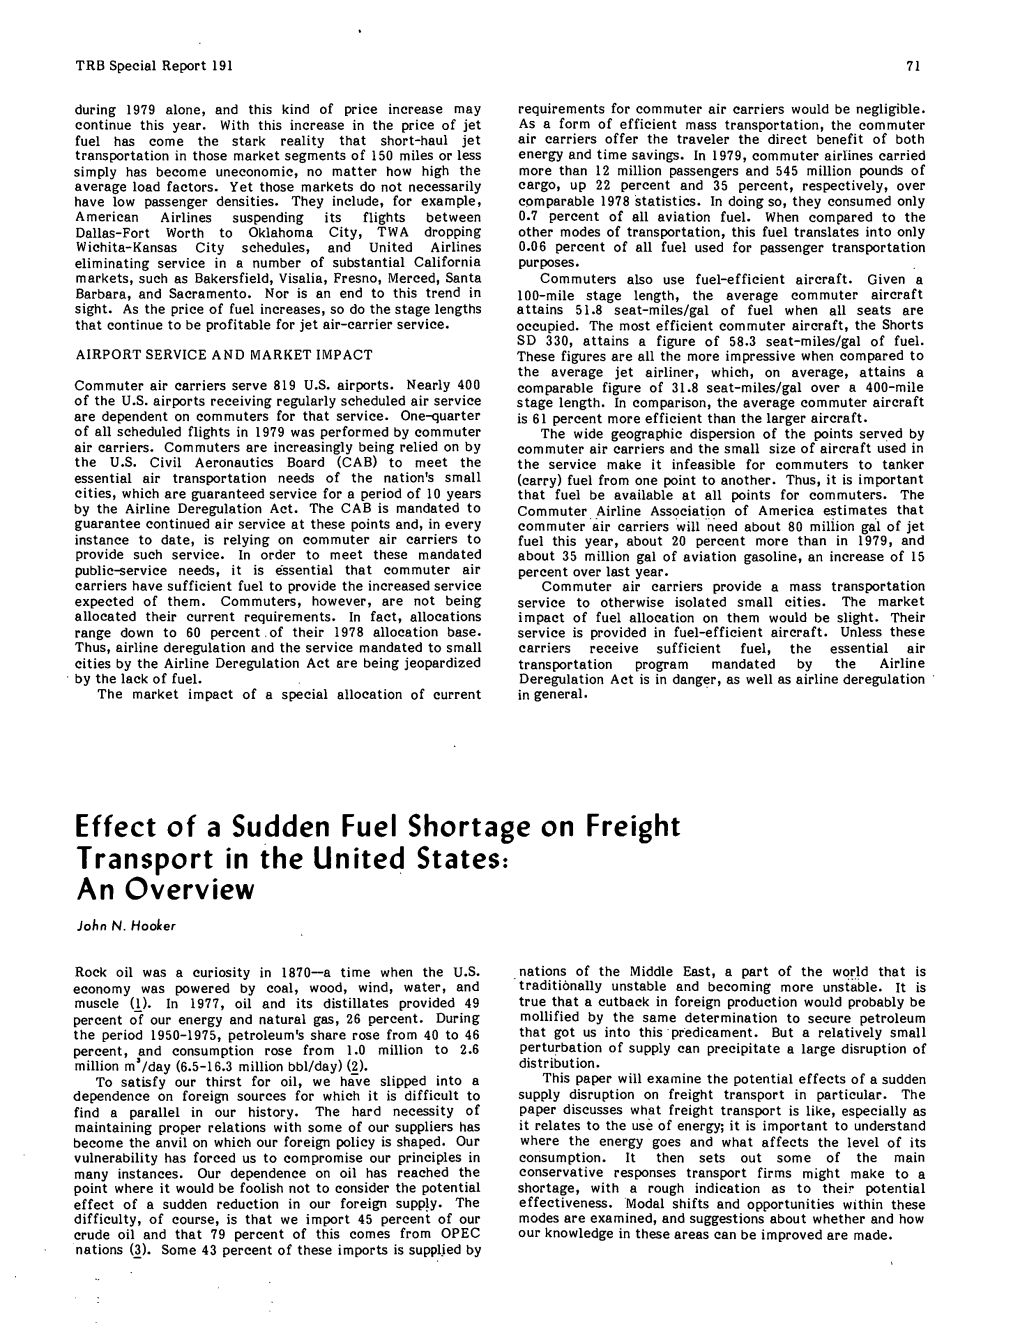 Effect of a Sudden Fuel Shortage on Freight Transport in the United States: an Overview John N